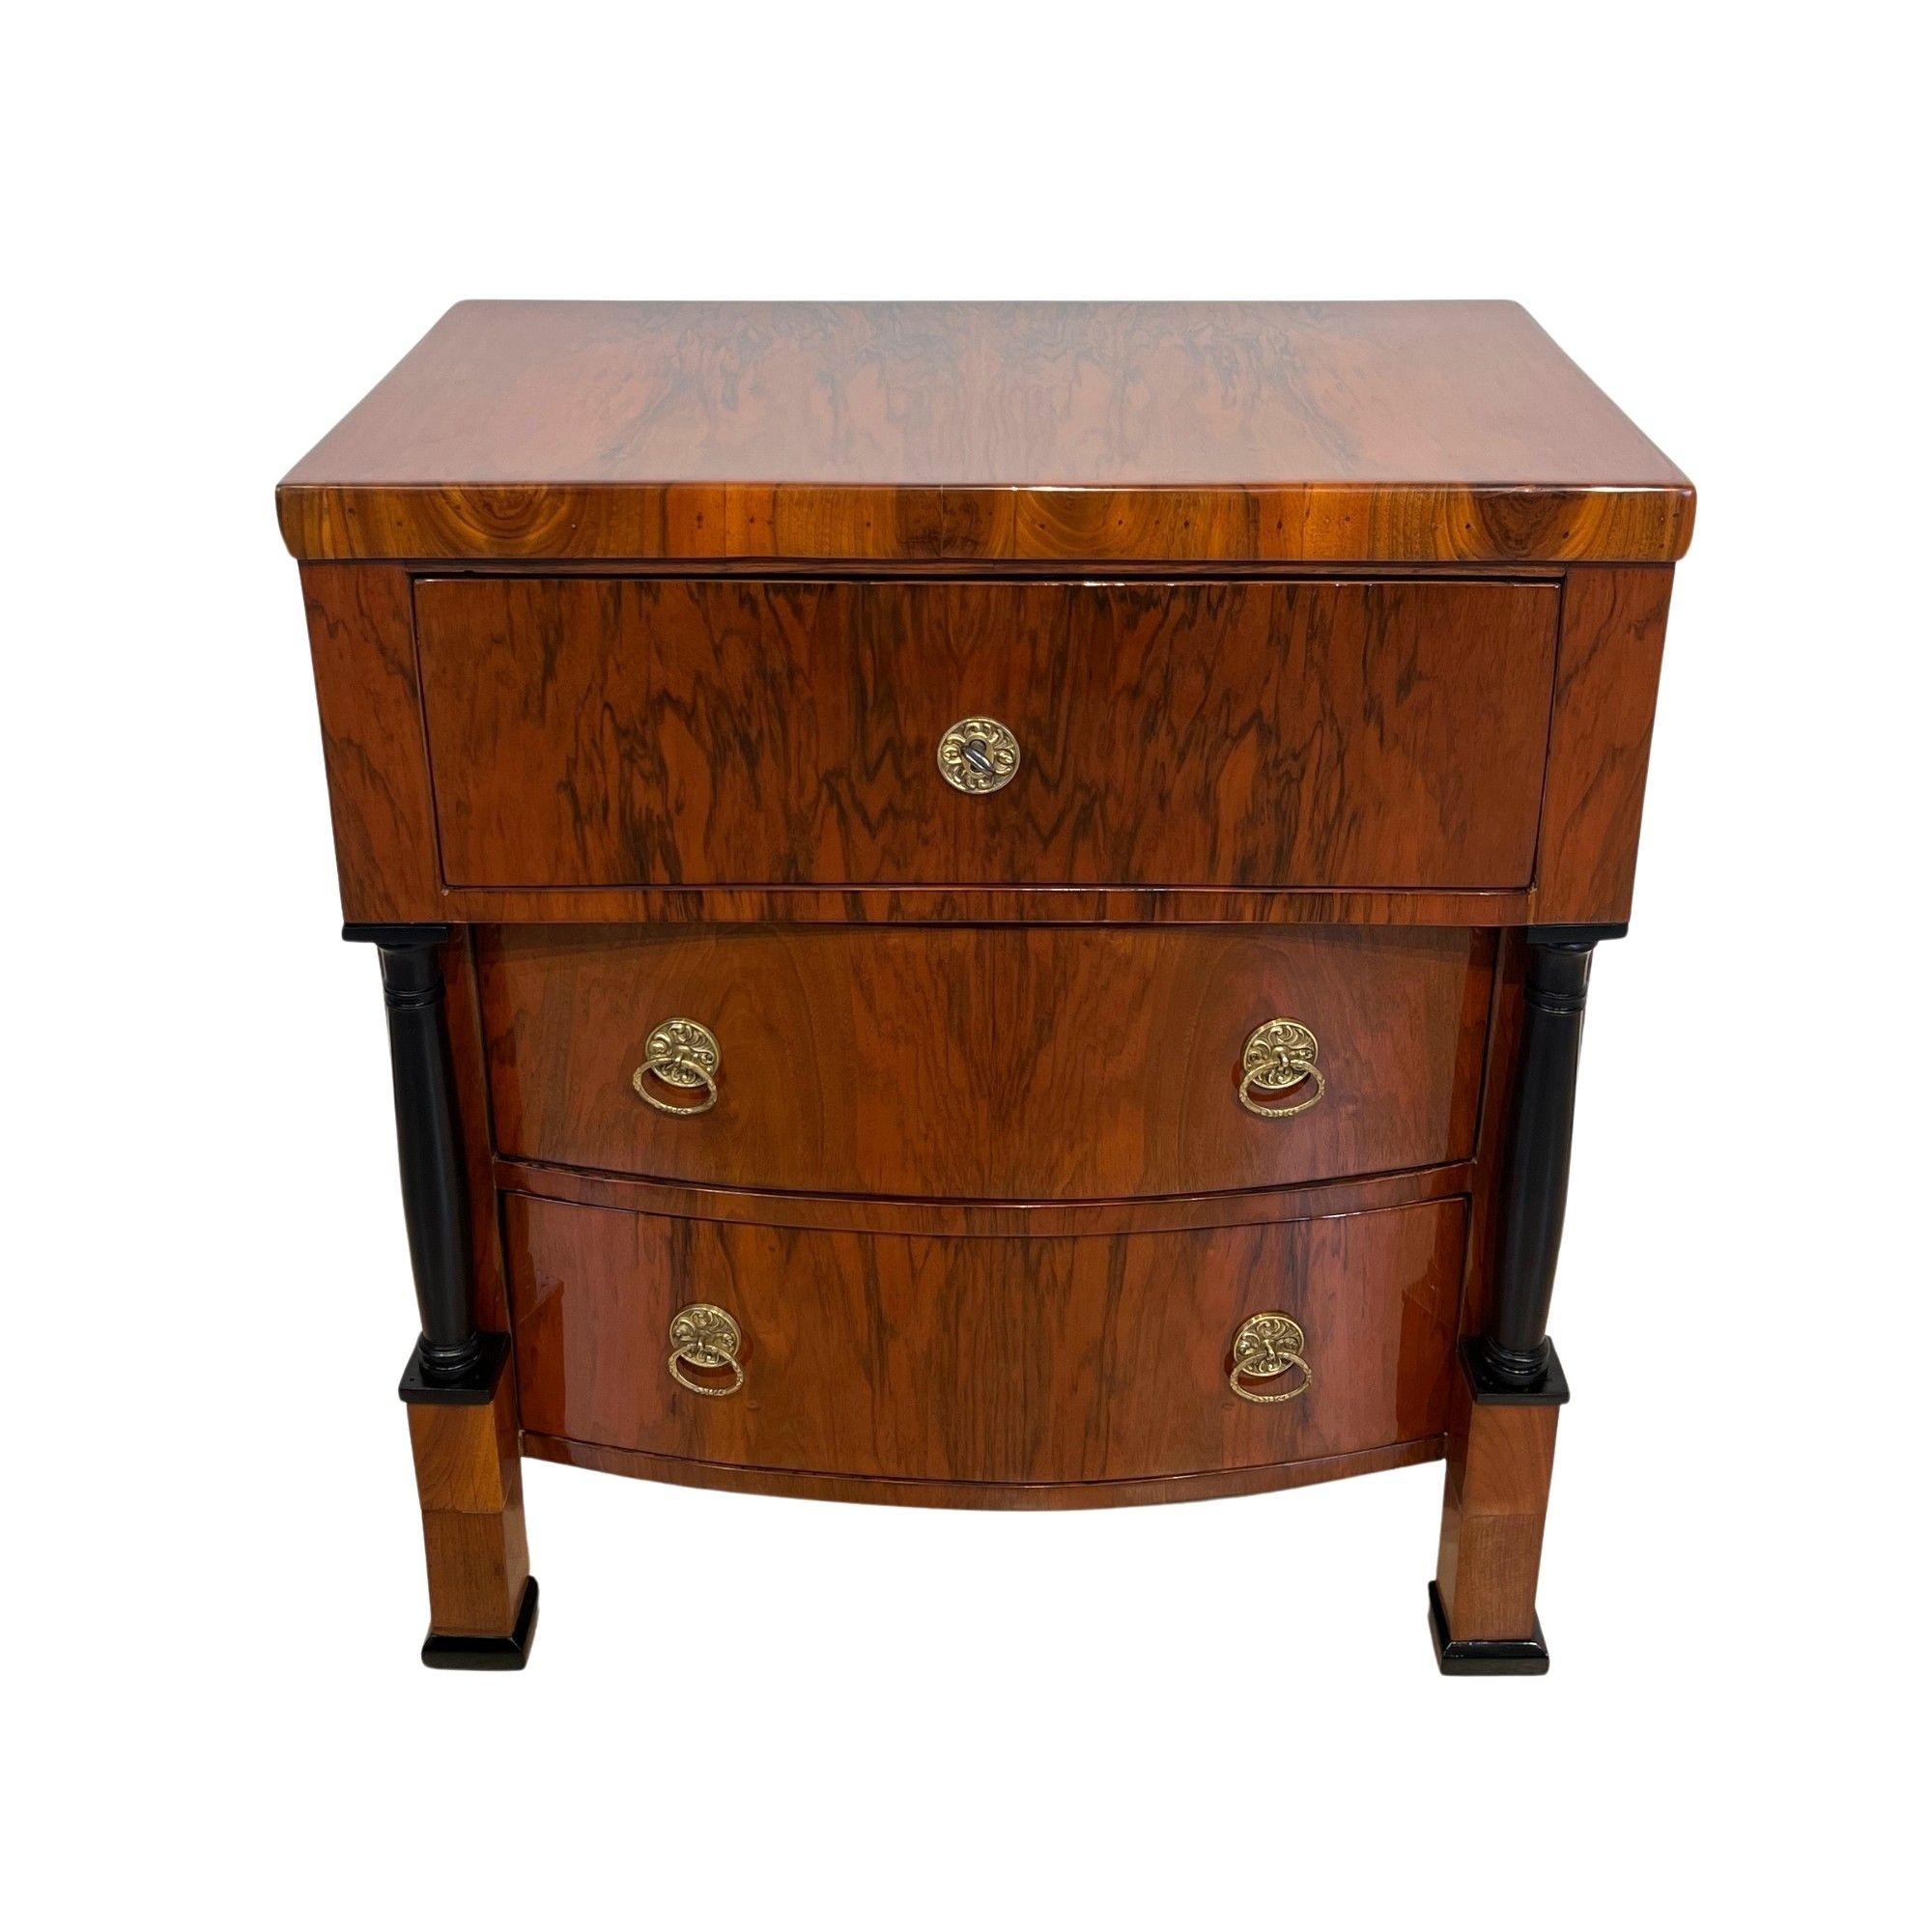 Small Biedermeier Commode in Walnut Veneer with Full Columns and Brass Fittings from Austria circa 1830
Walnut veneered and solid. Two ebonized full columns.
Top drawer straight, bottom two cambered/convex drawers.
Old brass fittings. Restored and